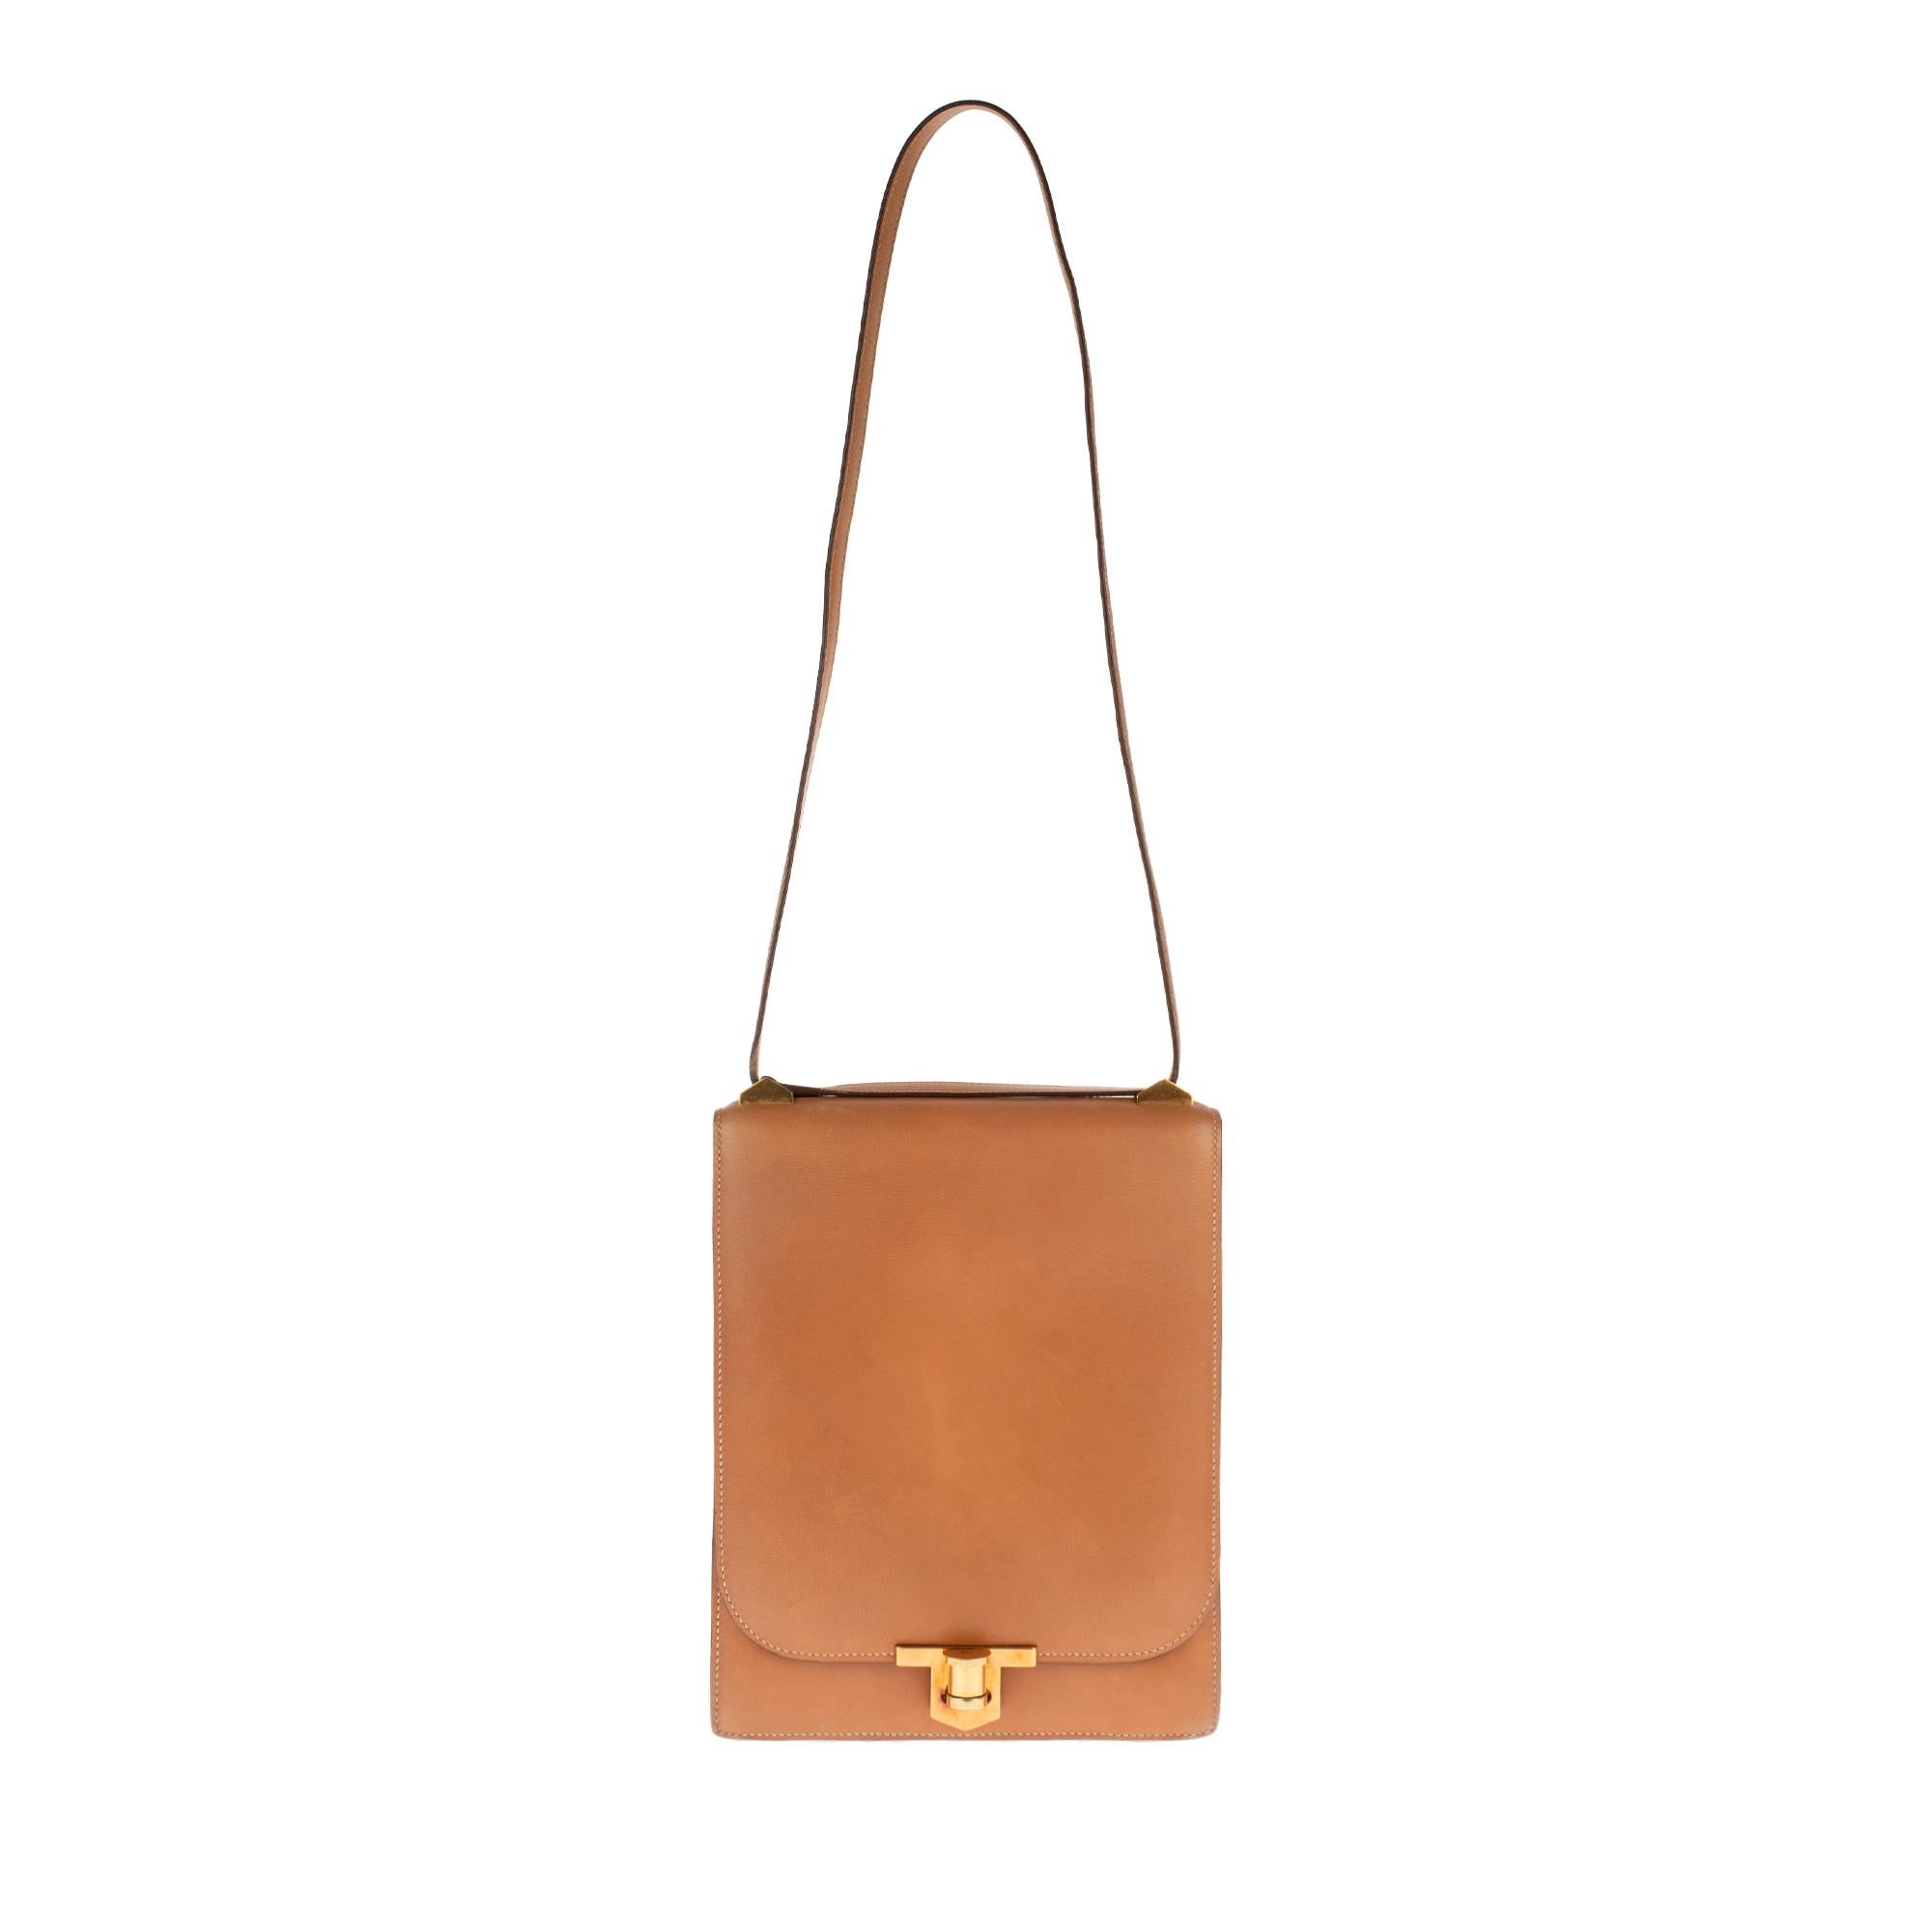 Very charming Hermès hobo bag in gold calfskin box leather with 2 gussets, gold plated hardware, leather handle box gold for a shoulder support (handle length: 36 cm). 1 patch pocket at the back. 
Flap closure and vertical stud button. 
Interior in